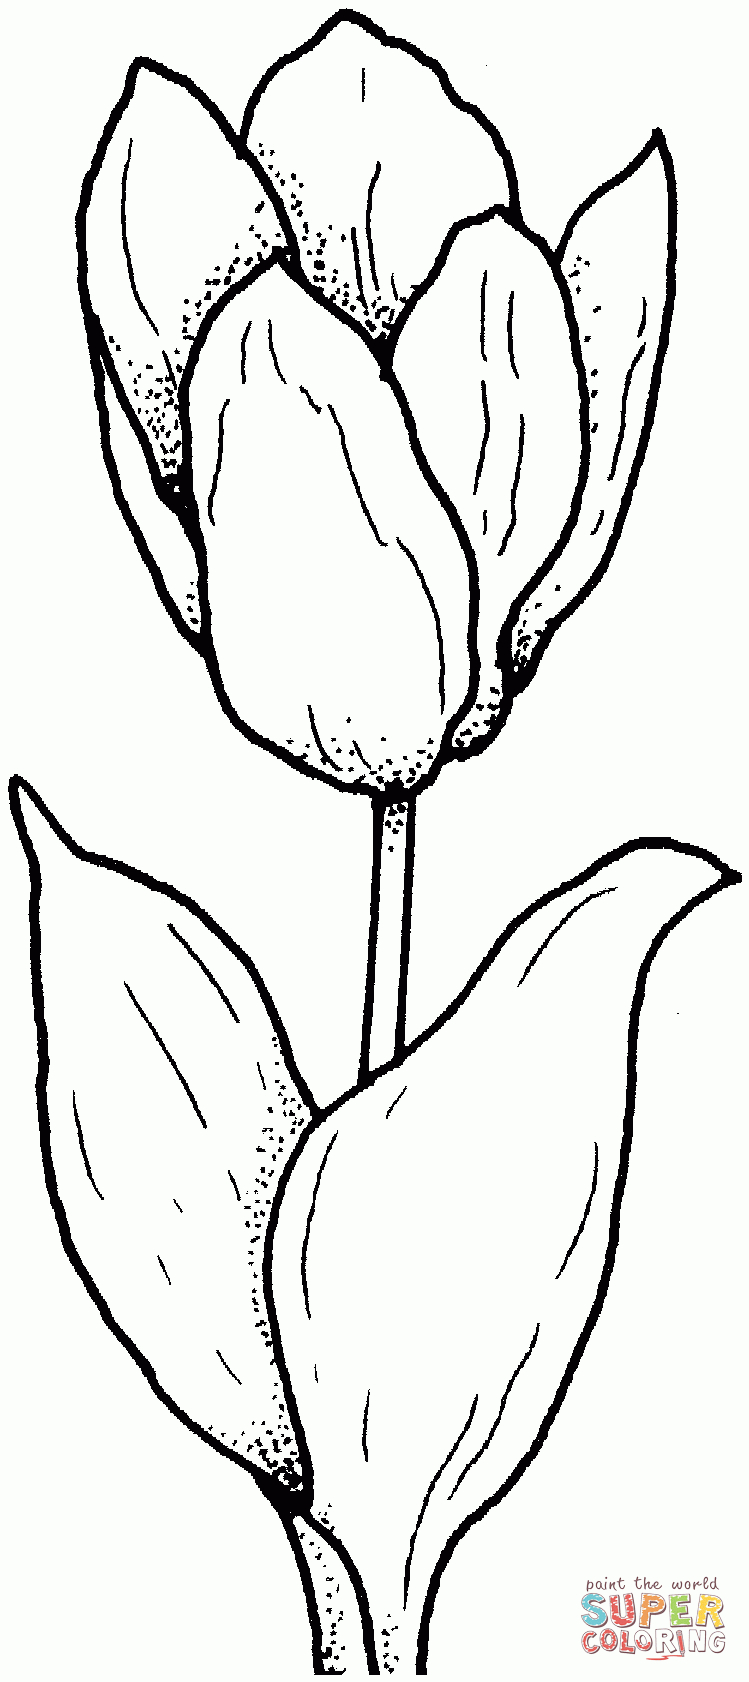 Tulip Coloring Page | Free Printable Coloring Pages - Free Printable Tulip Coloring Pages